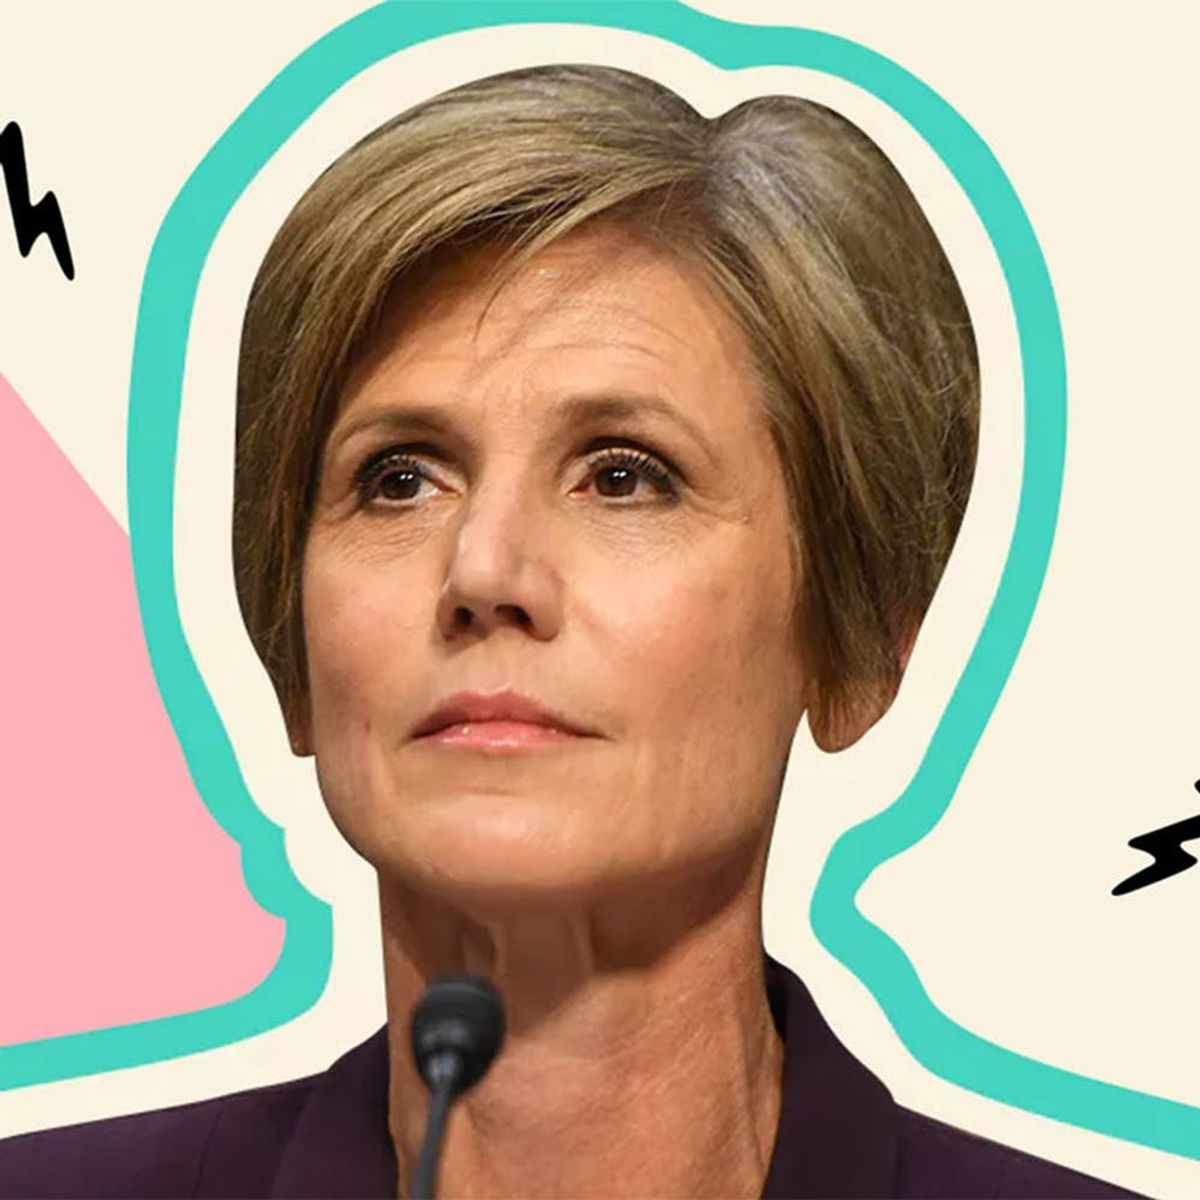 How Sally Yates Became a Superhero for Political Integrity